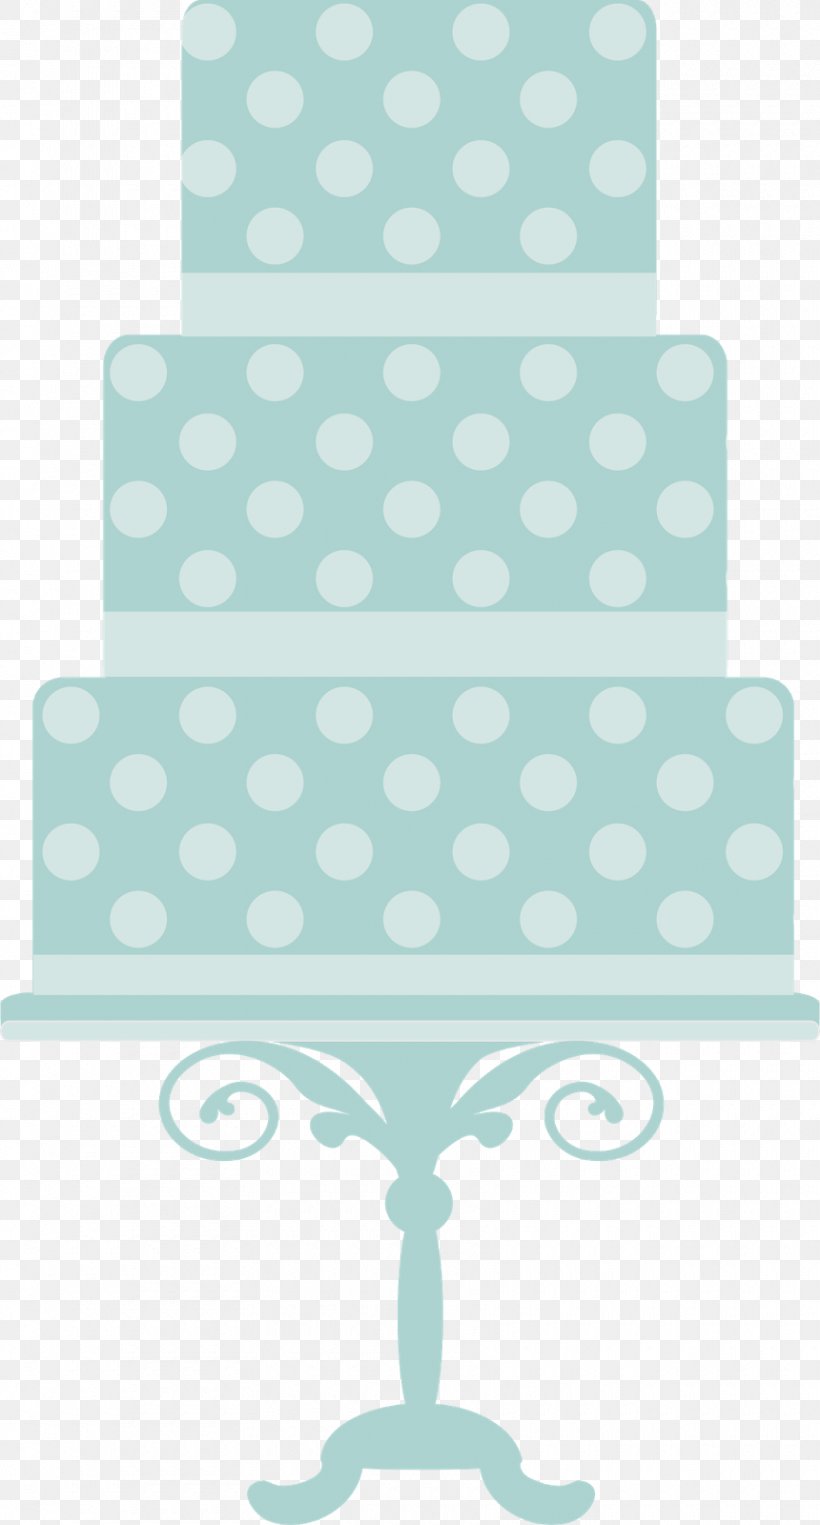 Cake Decorating Wedding Ceremony Supply Clip Art, PNG, 860x1600px, Cake Decorating, Aqua, Cake, Ceremony, Rectangle Download Free